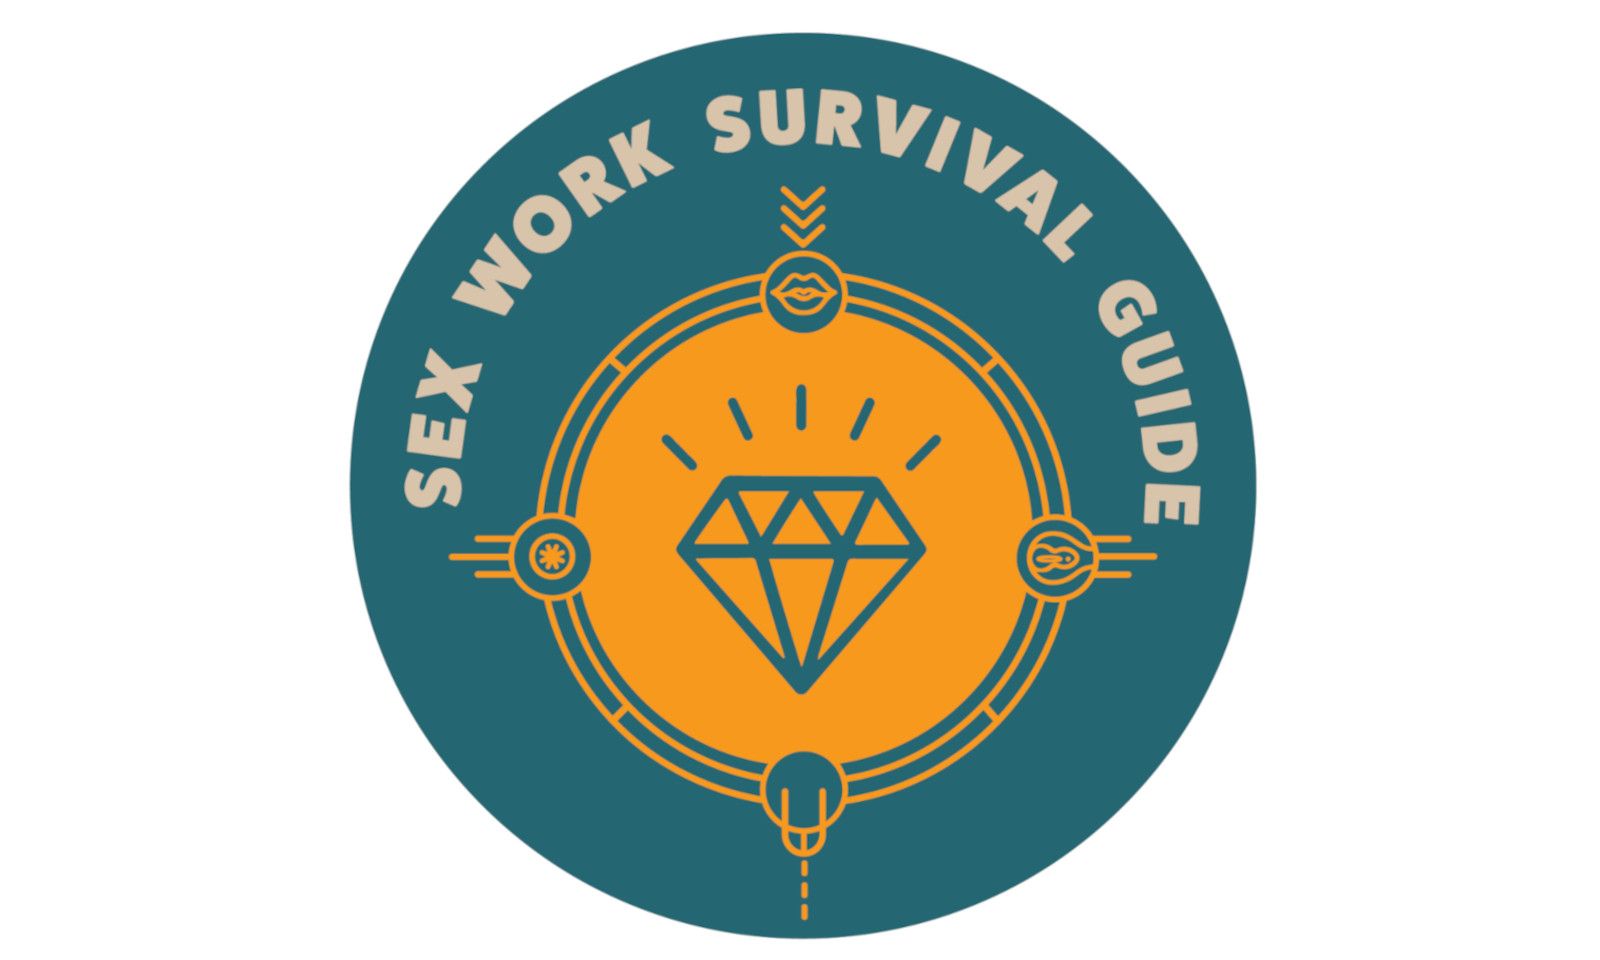 Sex Work Survival Guide to Host May 1 Summit